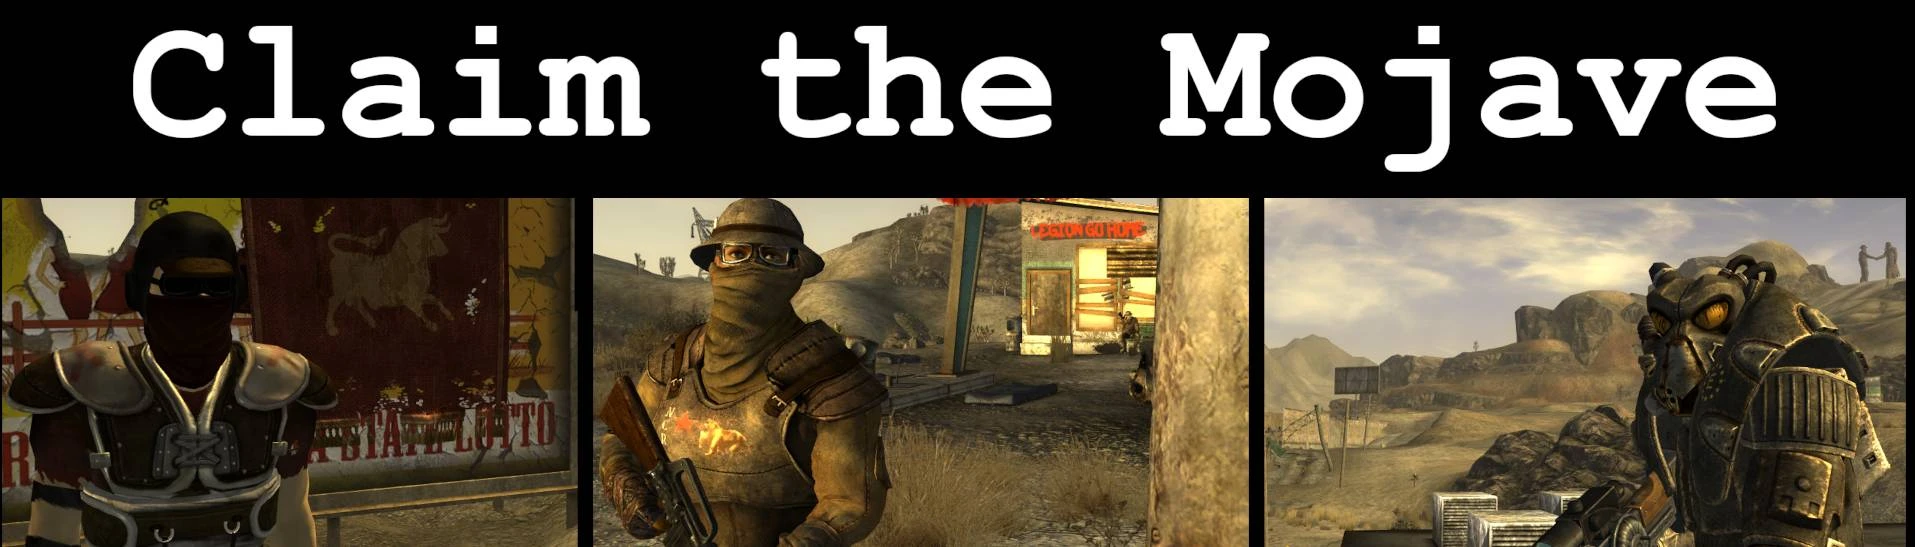 Claim the Mojave (and the Capital) at Fallout New Vegas - mods and community